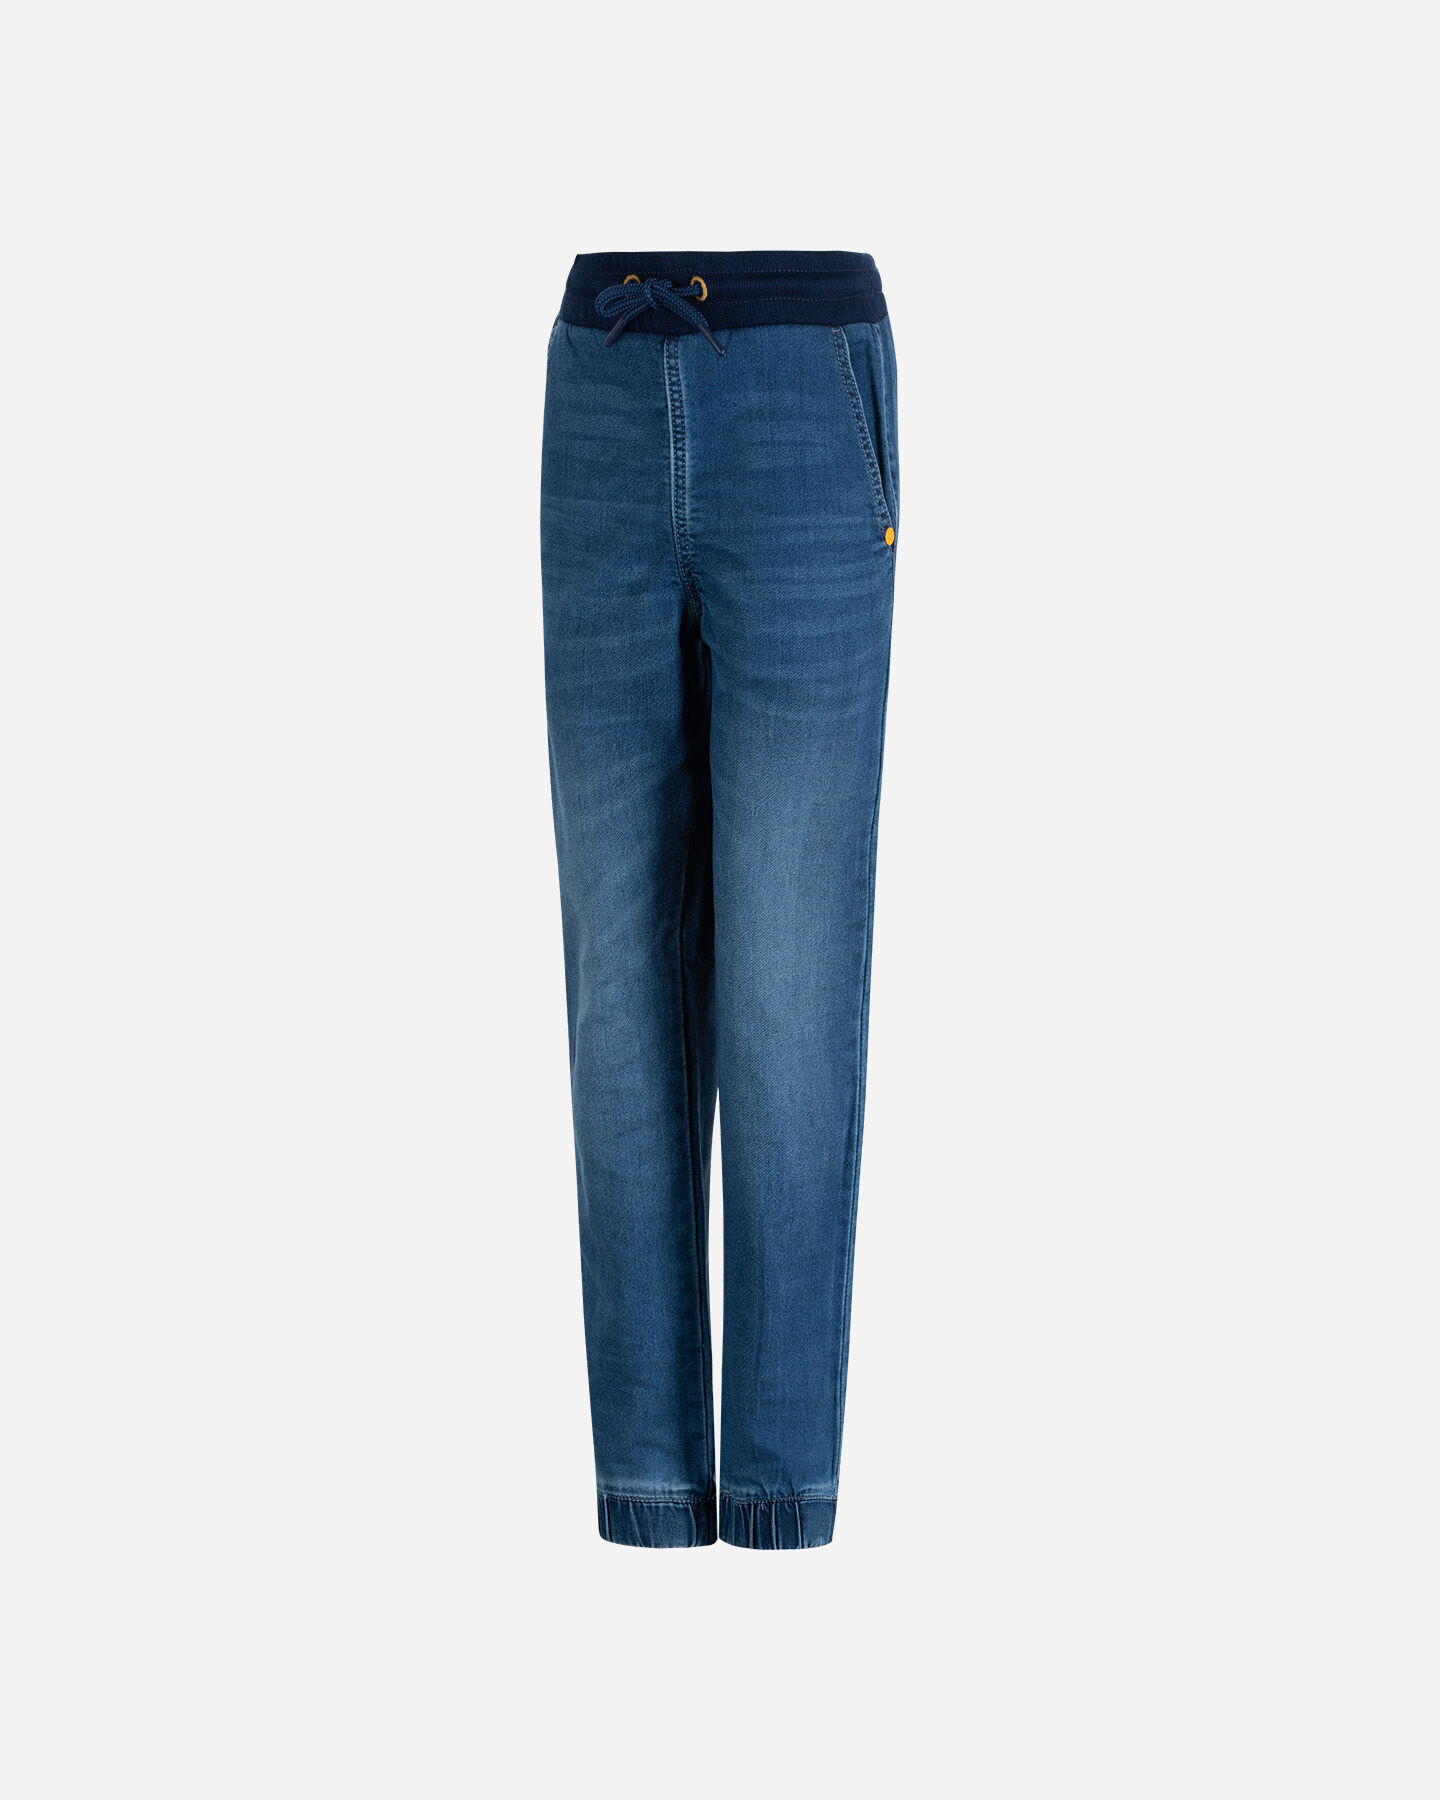  Jeans ADMIRAL LIFESTYLE JR S4106381|MDBLUE|10A scatto 0